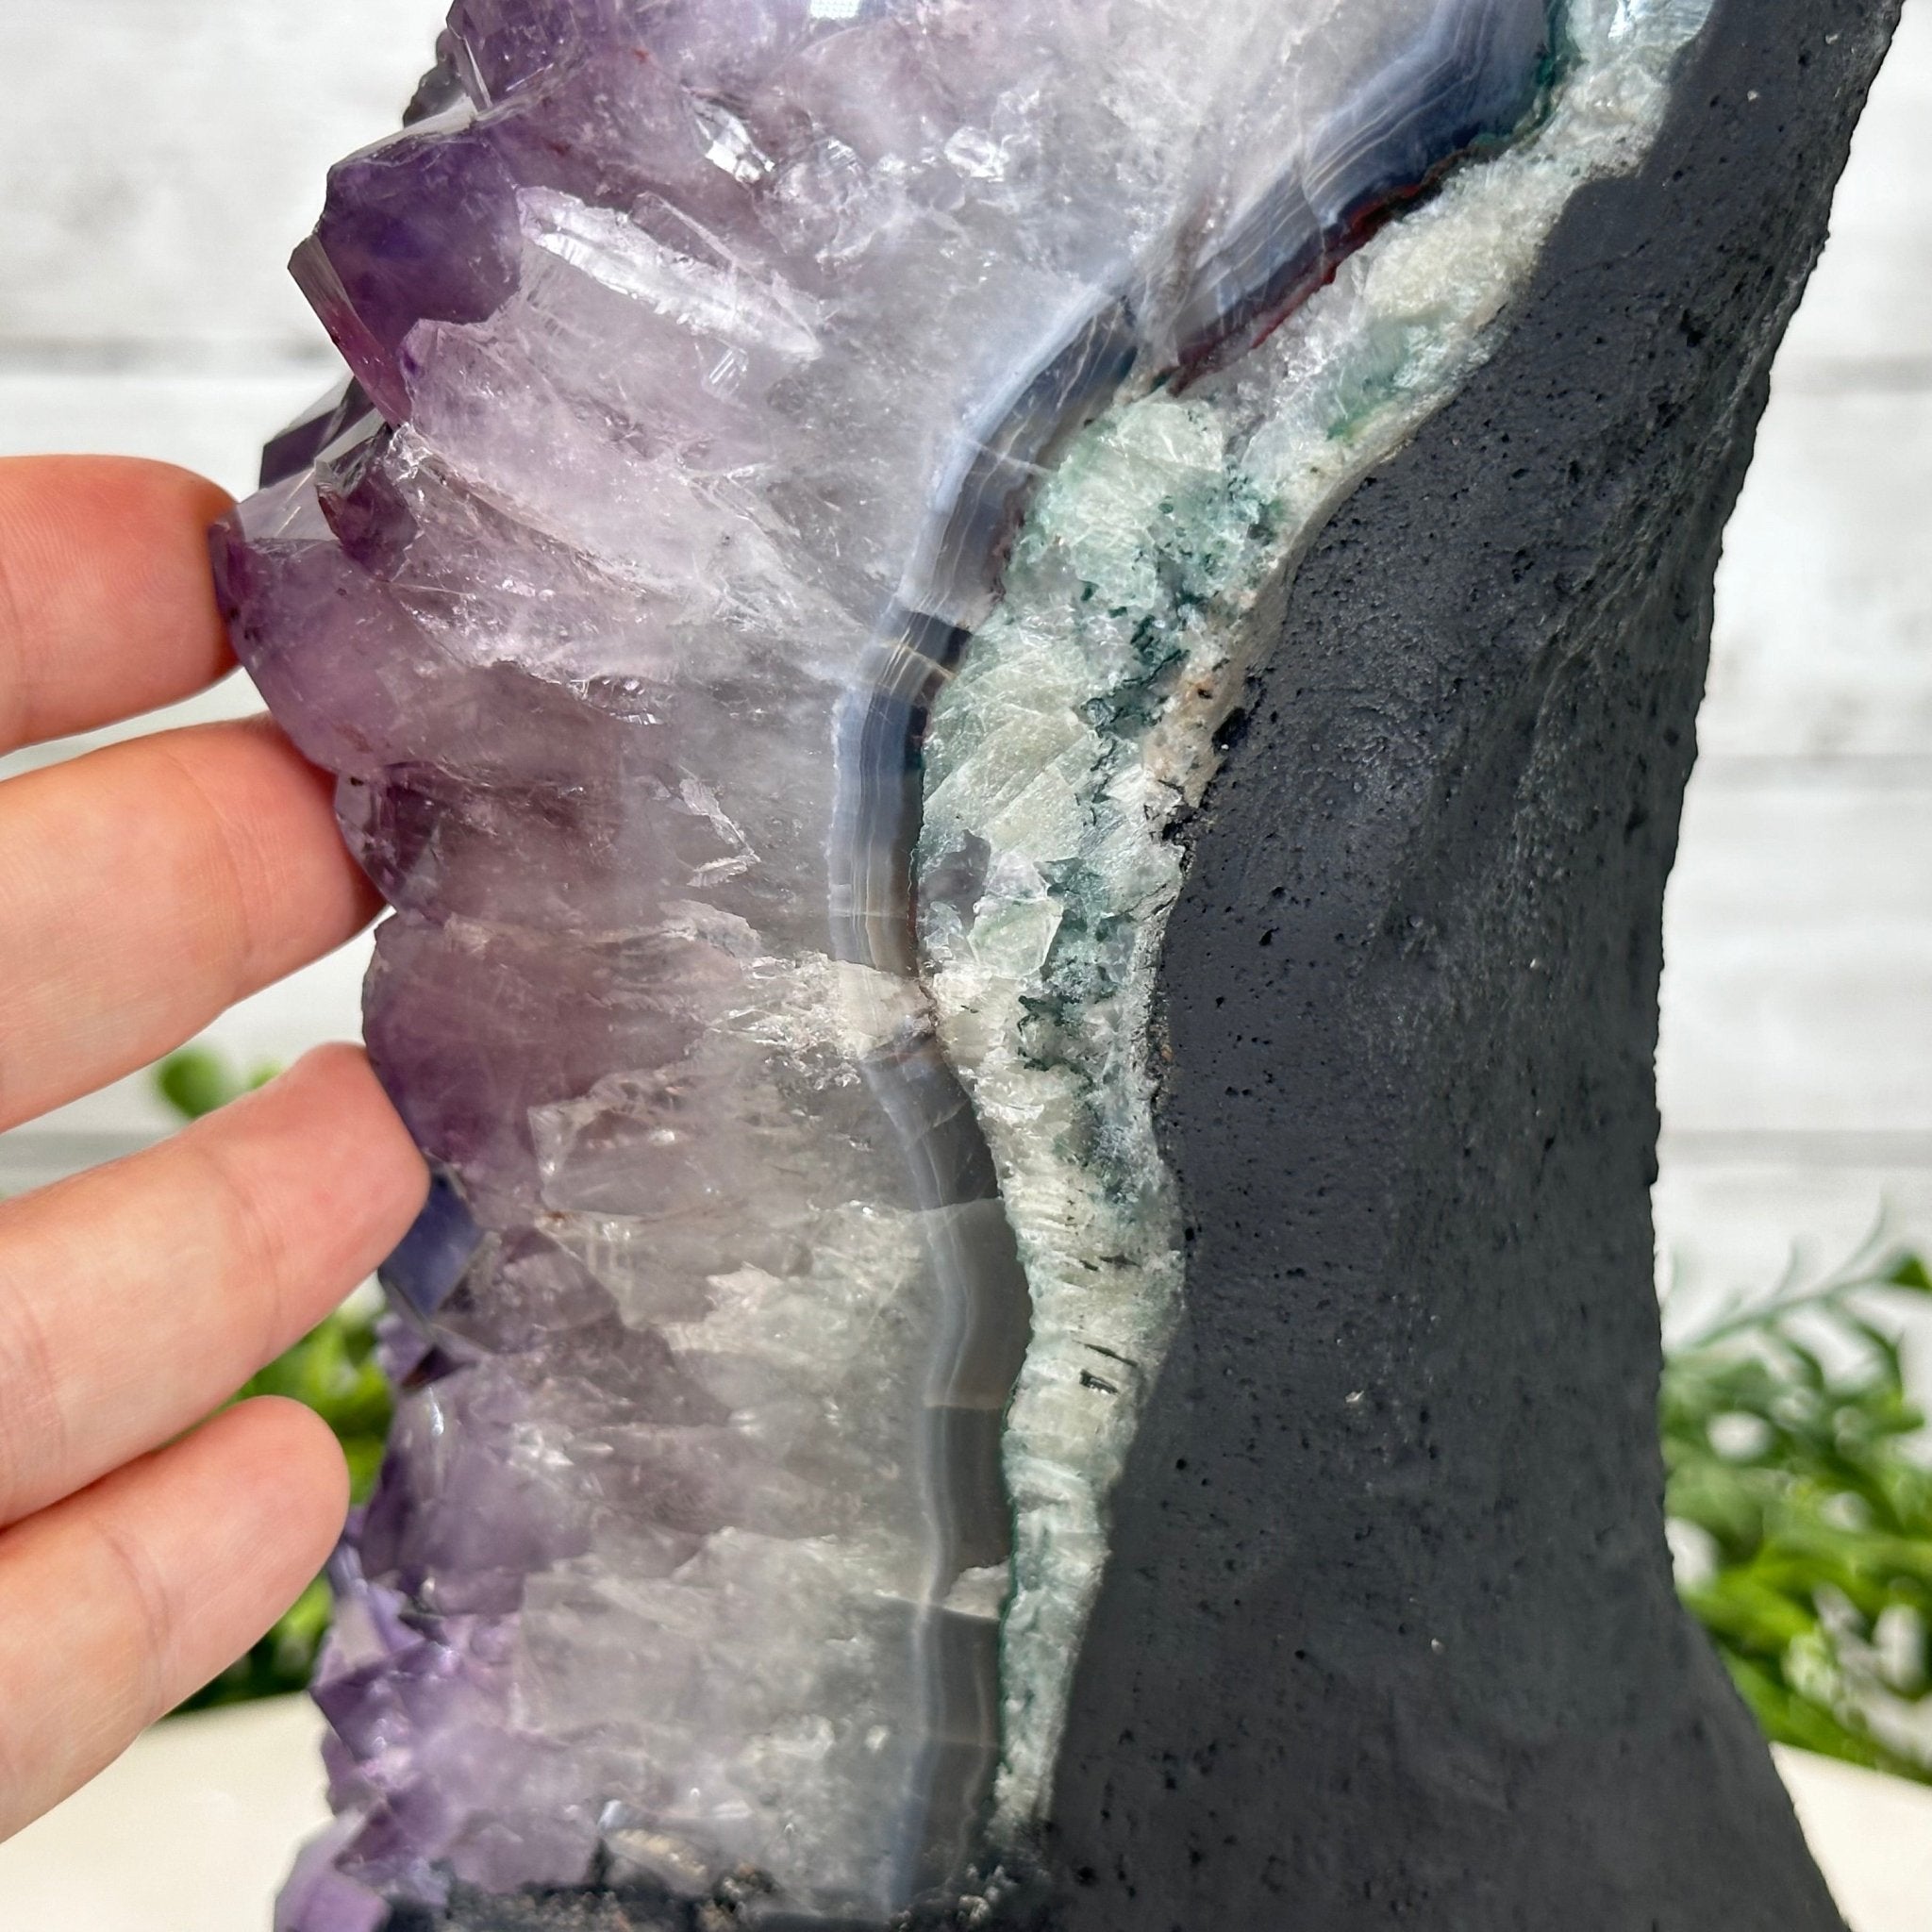 Extra Quality Amethyst Cluster, Cement Base, 11" Tall #5614-0115 - Brazil GemsBrazil GemsExtra Quality Amethyst Cluster, Cement Base, 11" Tall #5614-0115Clusters on Cement Bases5614-0115